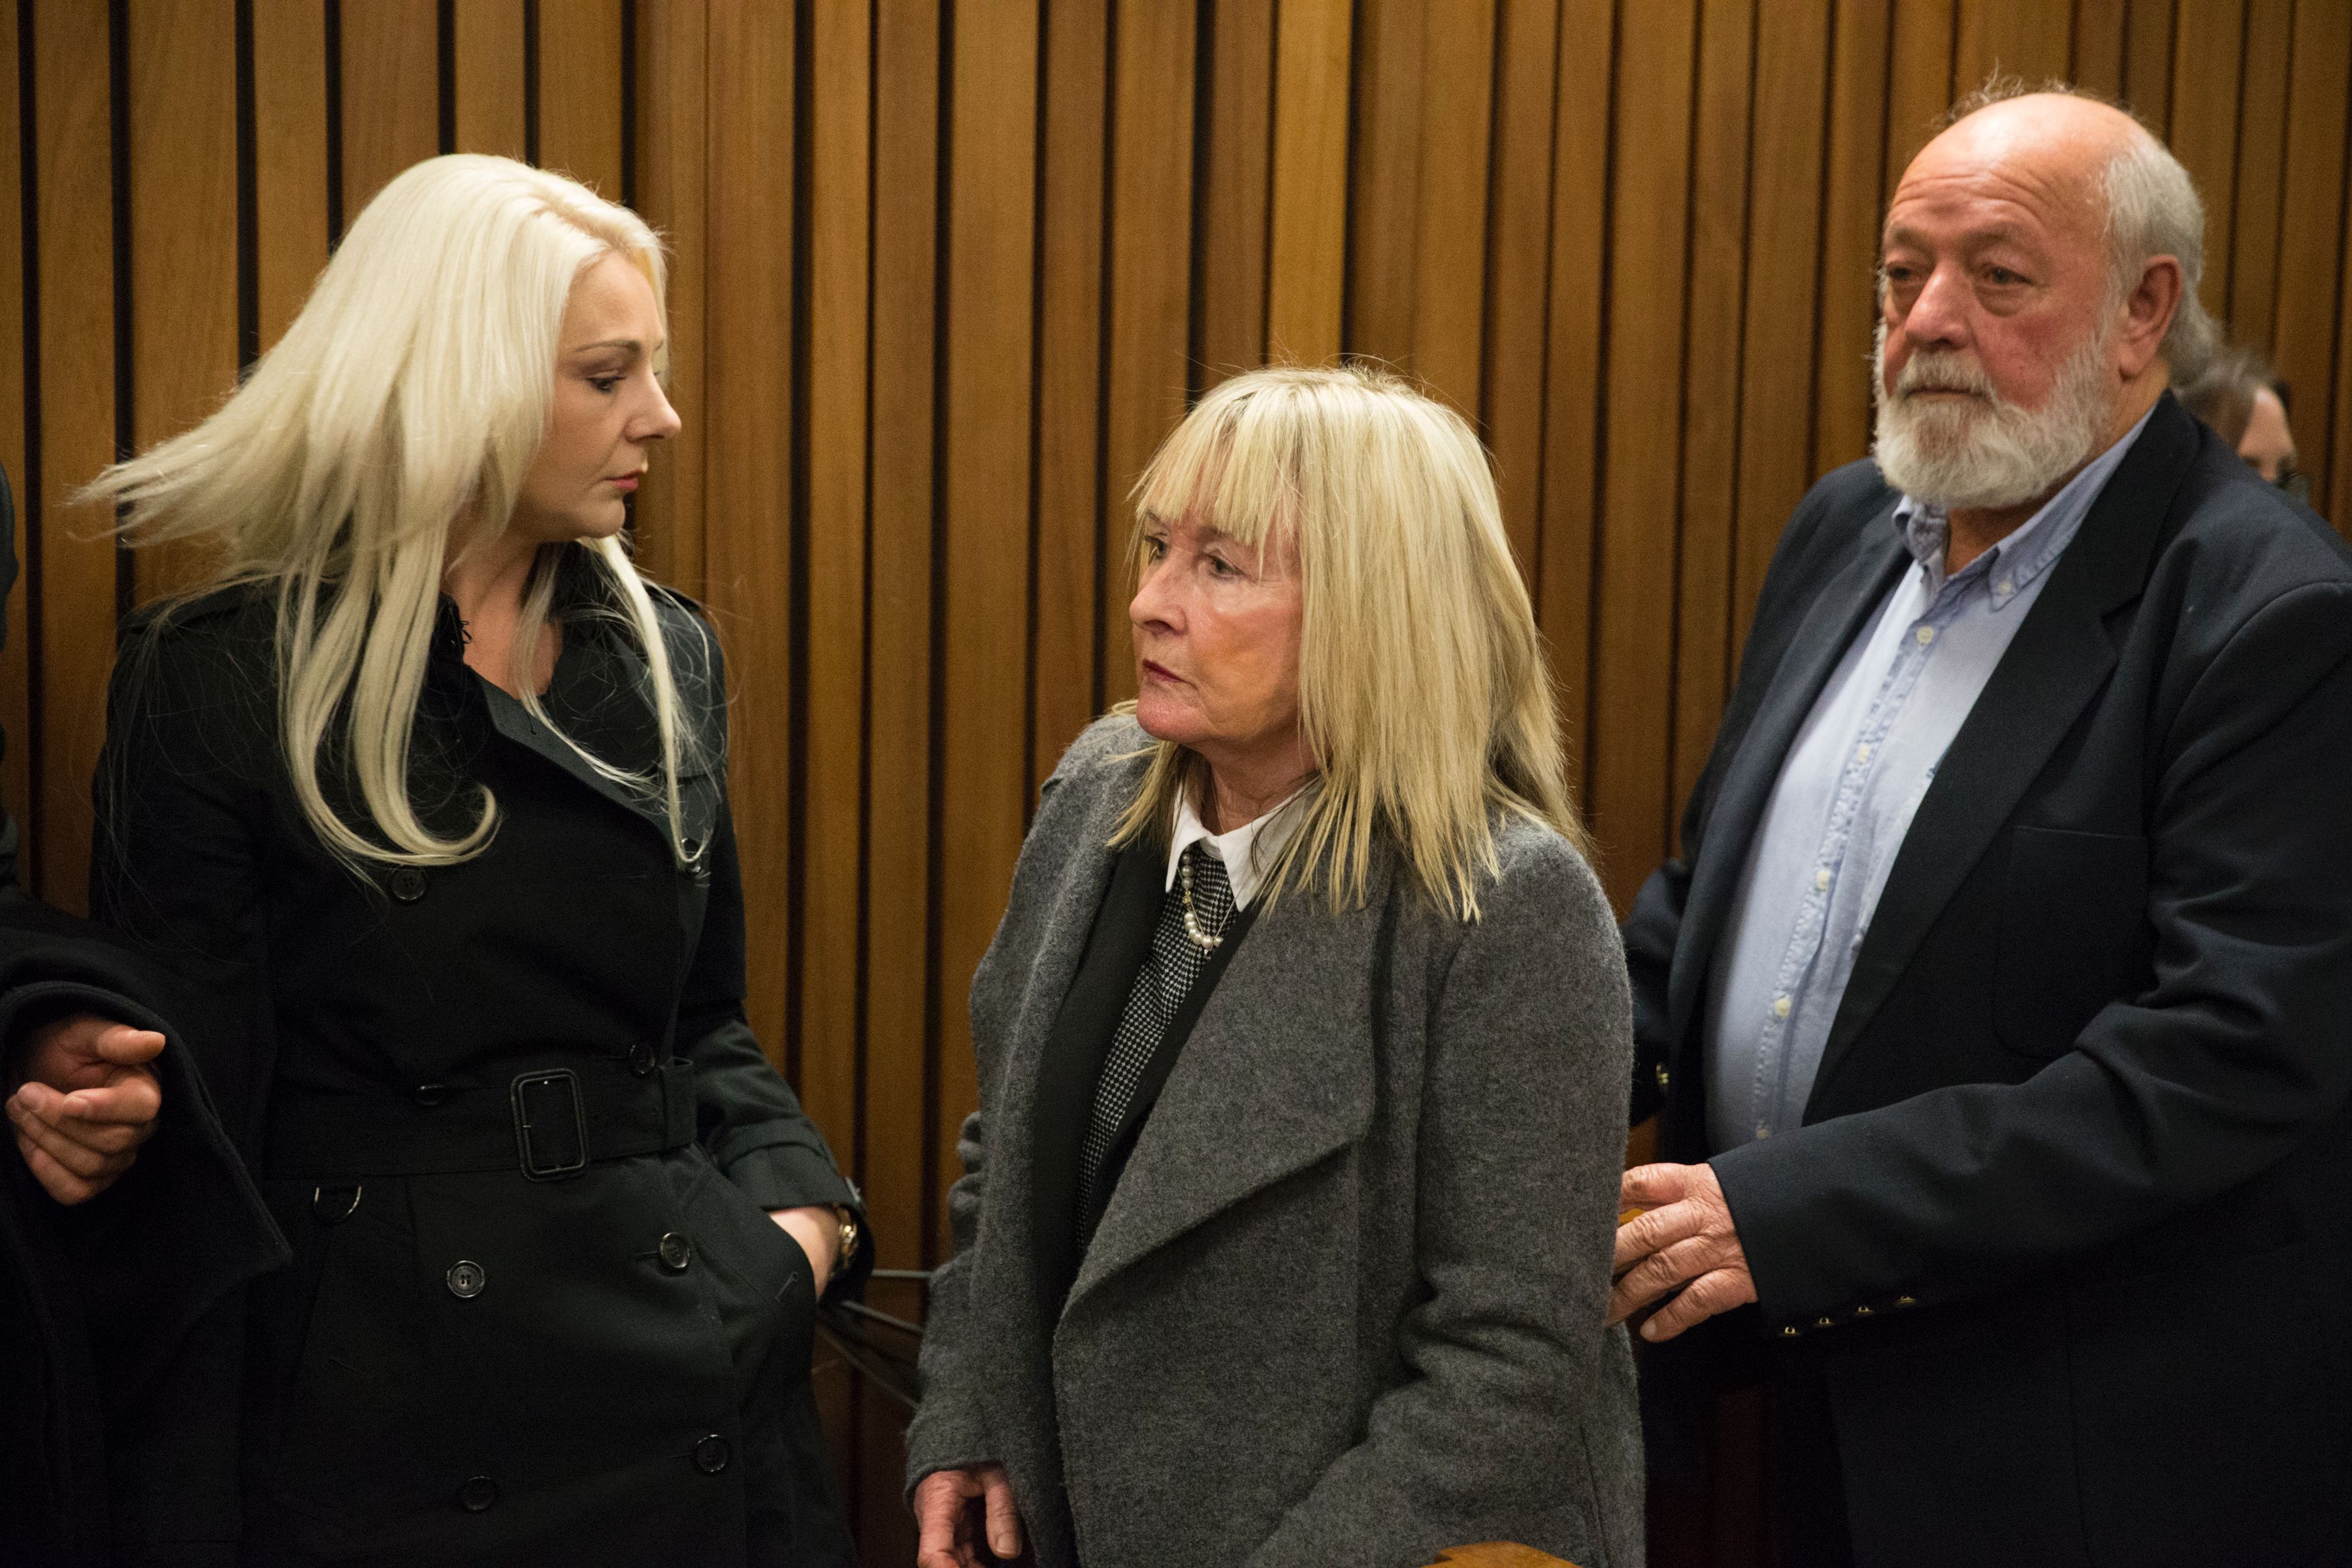 Reeva Steenkamp's Family 5 Fast Facts You Need to Know